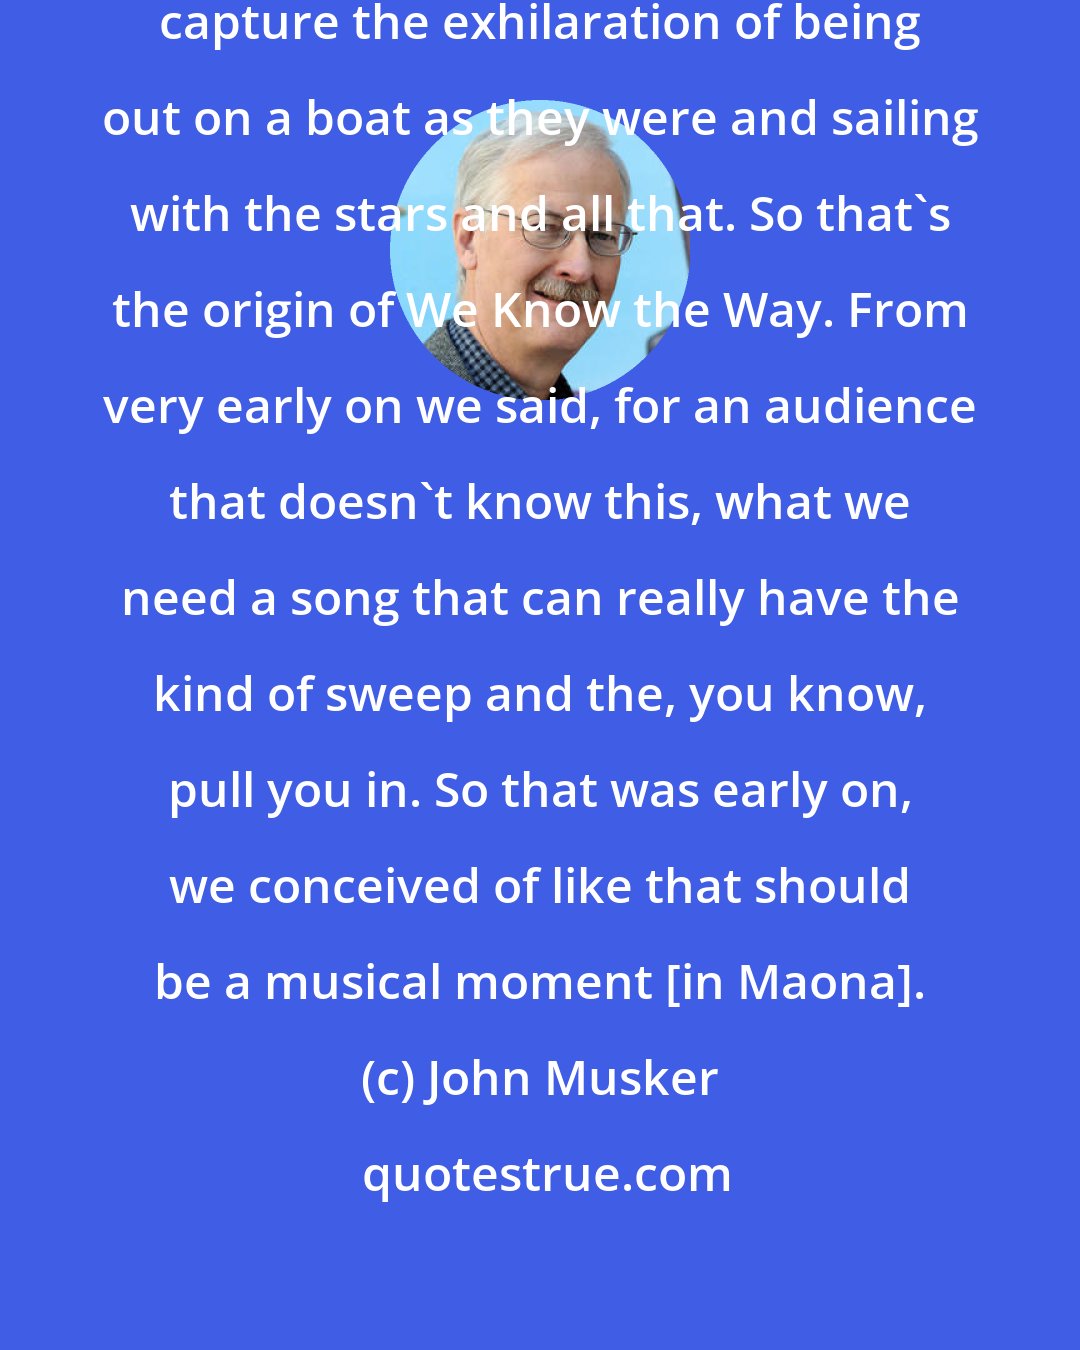 John Musker: We wanted a musical number that would capture the exhilaration of being out on a boat as they were and sailing with the stars and all that. So that's the origin of We Know the Way. From very early on we said, for an audience that doesn't know this, what we need a song that can really have the kind of sweep and the, you know, pull you in. So that was early on, we conceived of like that should be a musical moment [in Maona].